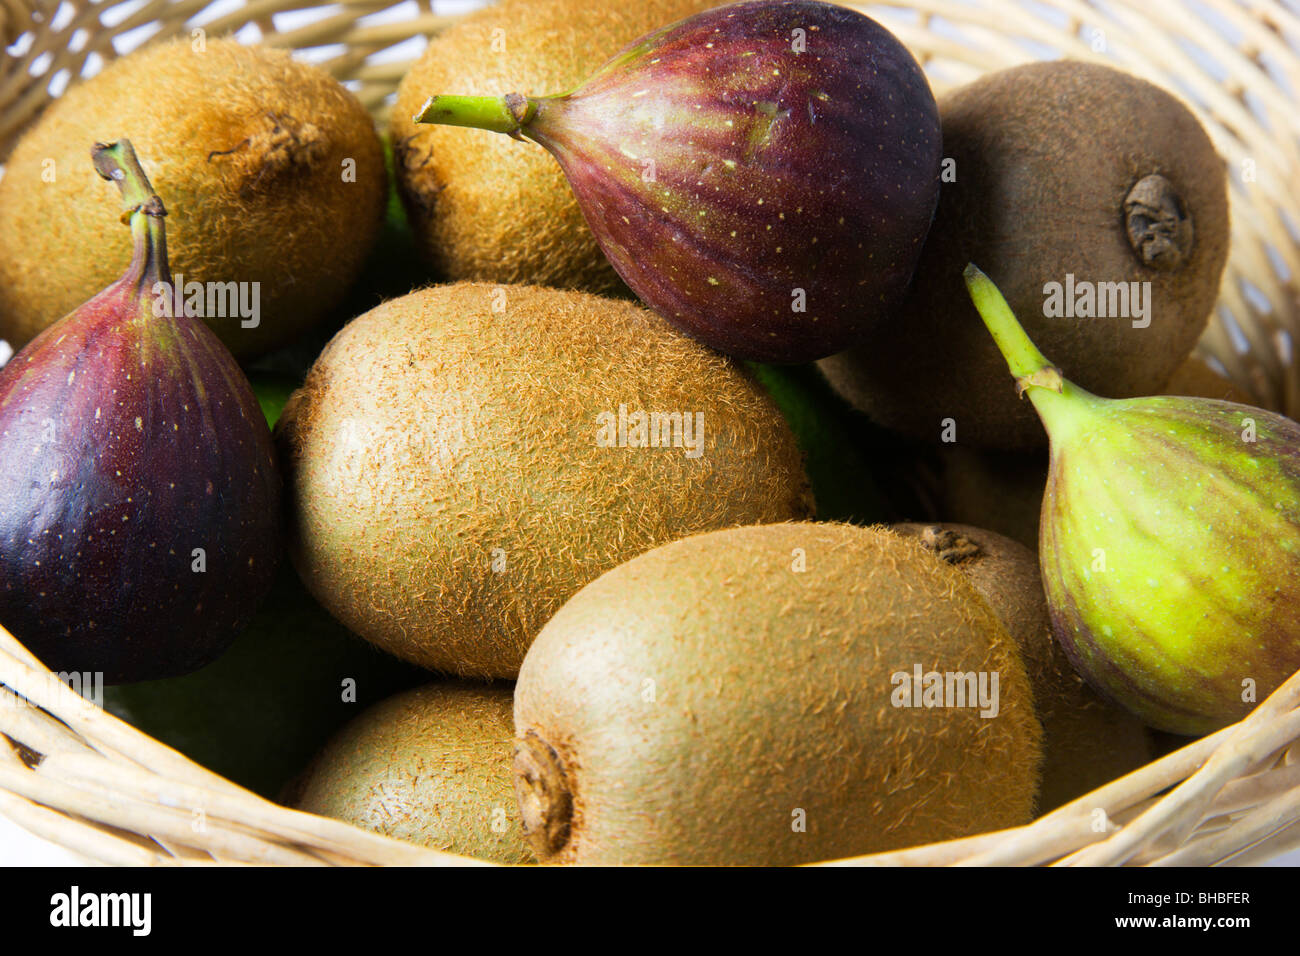 Kiwifruits and Figs in a basket Stock Photo